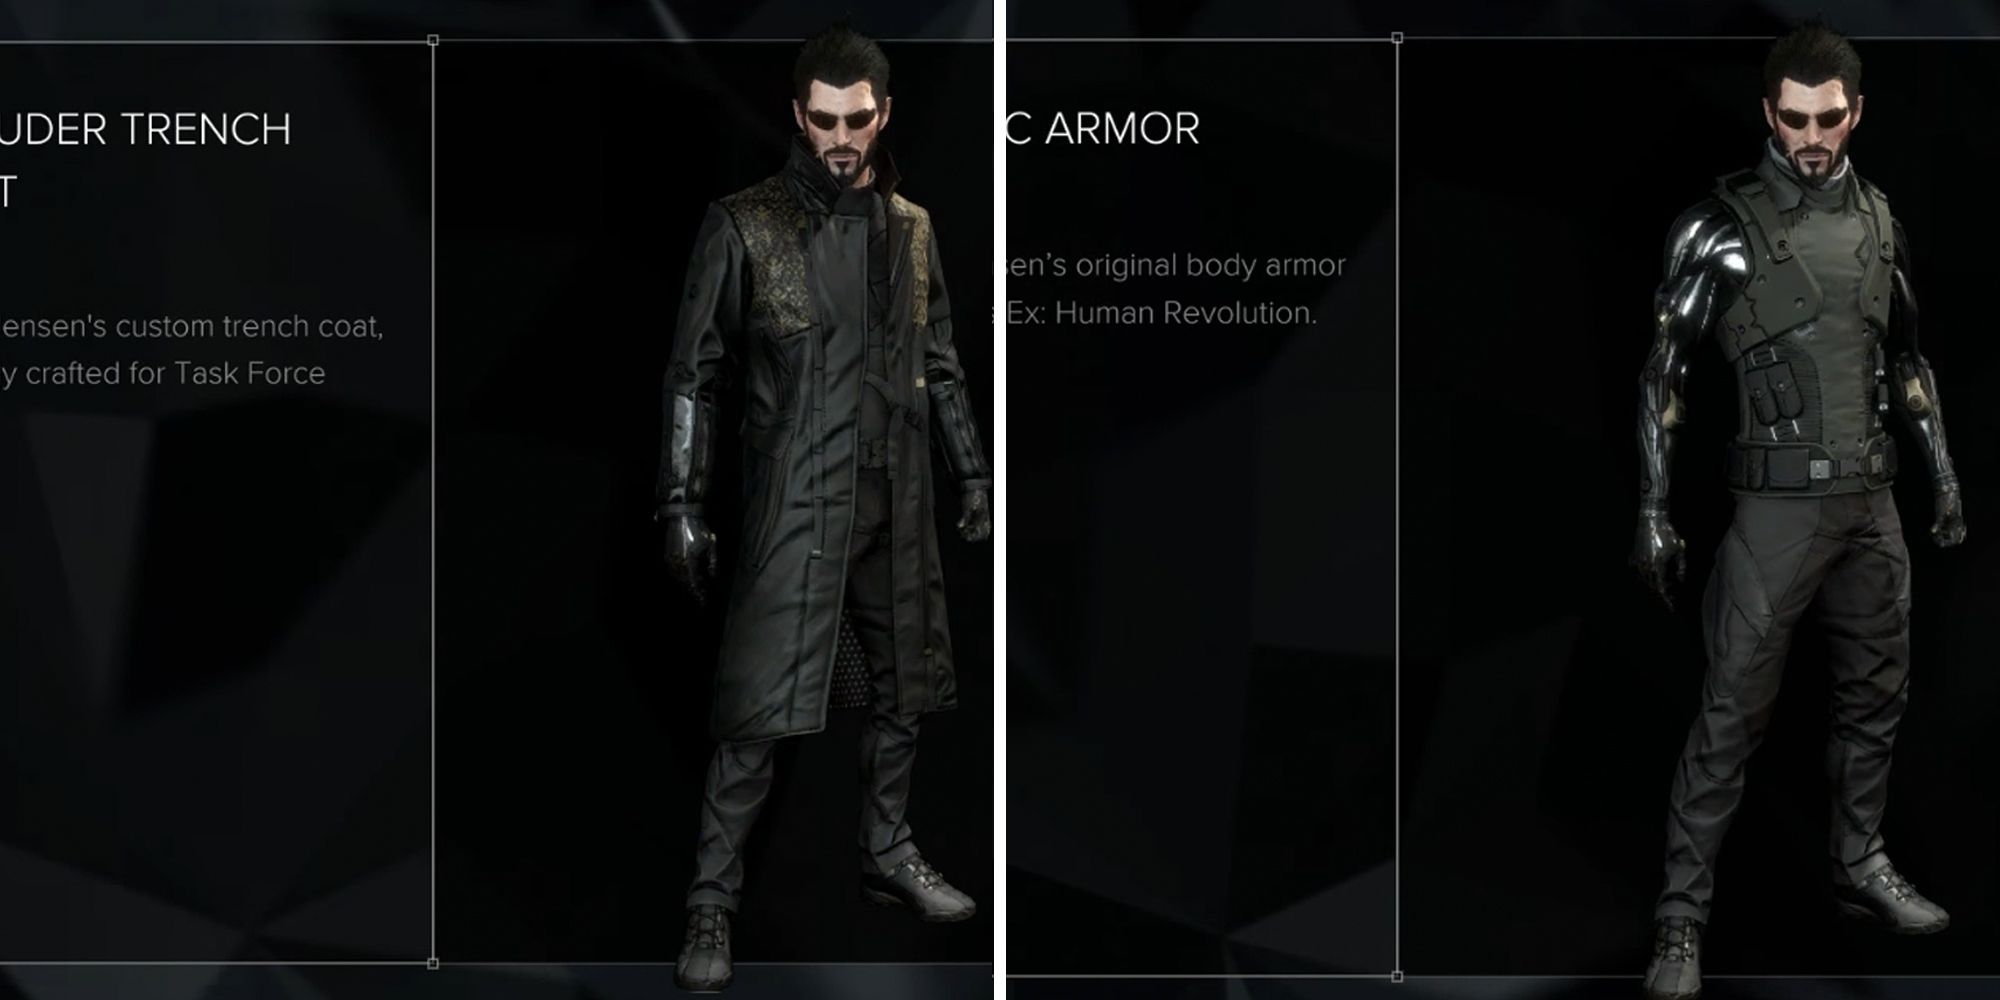 Deus Ex outfits split image. Trench coat and classic armor.